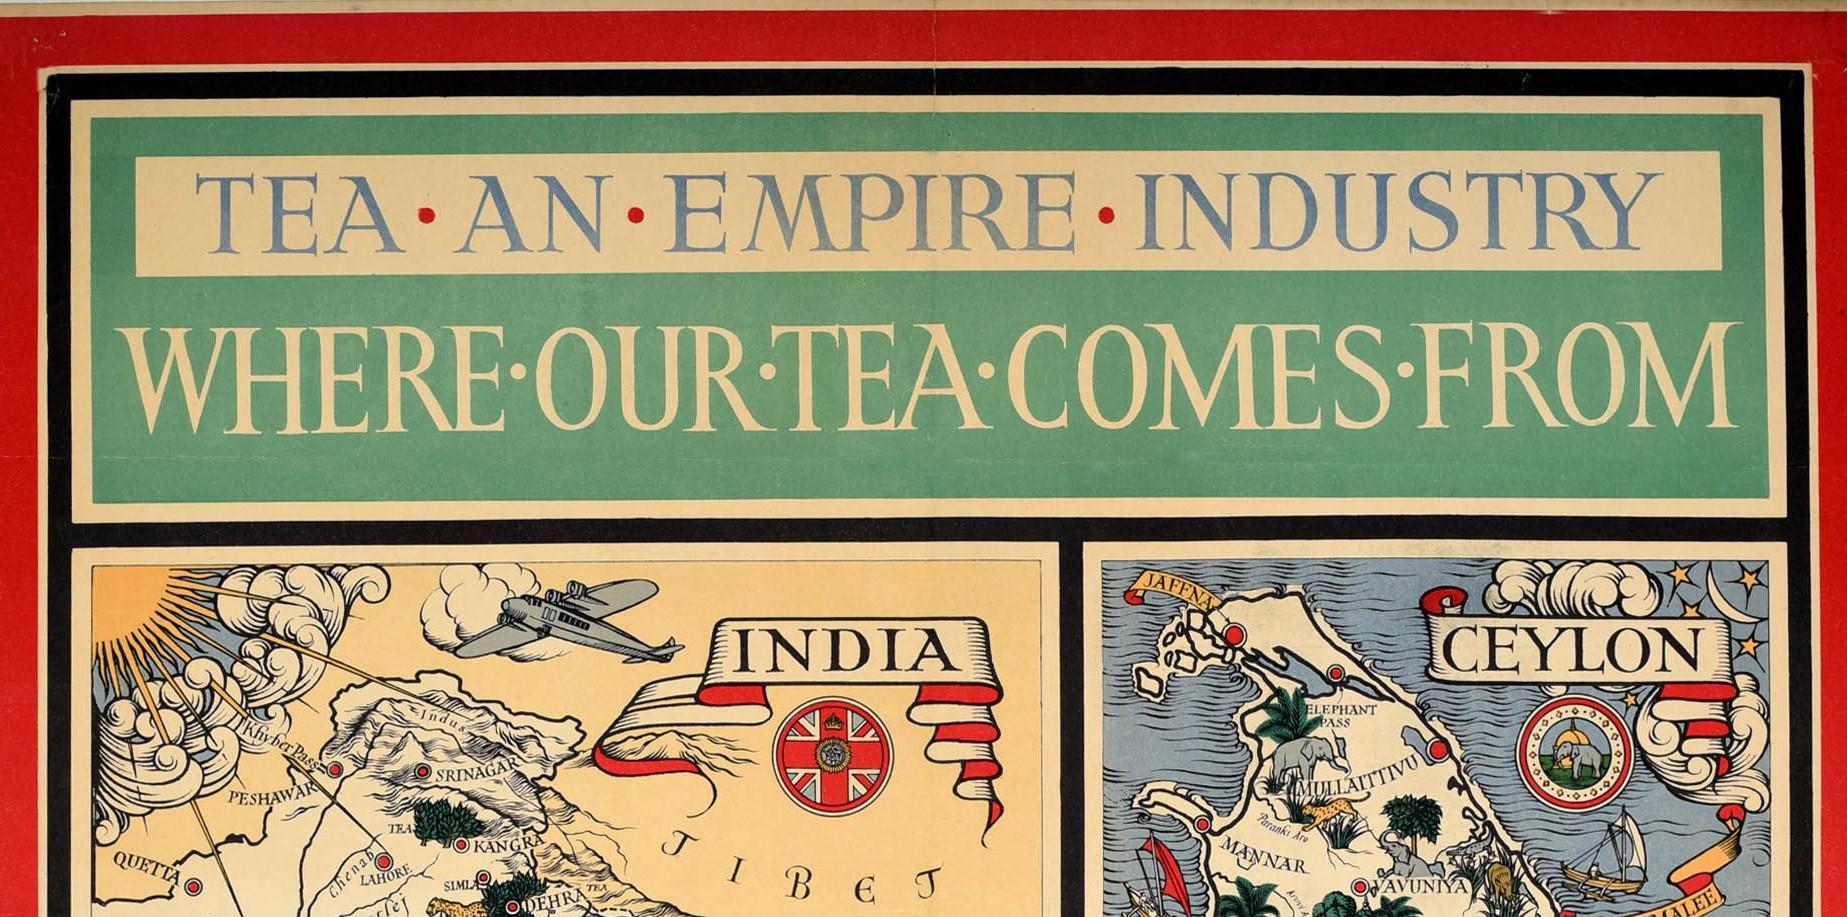 Original vintage advertising poster - Tea An Empire Industry Where Our Tea Comes From. Rare small version depicting colourful illustrated maps of India and Ceylon (now Sri Lanka) featuring the city names in decorative banners as well as images of